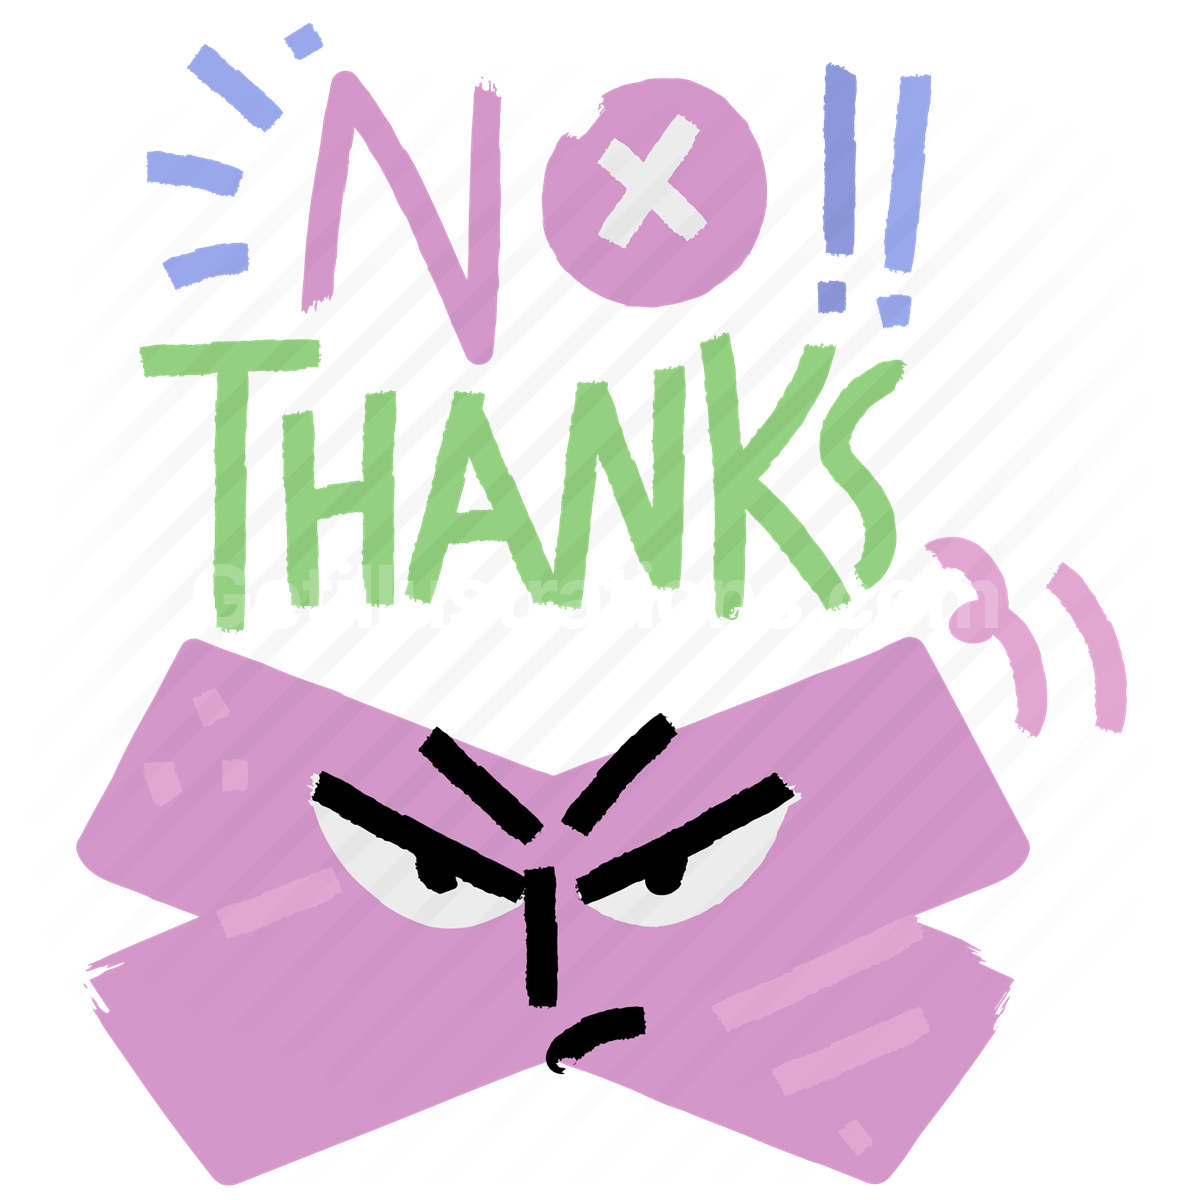 bandages, no thanks, thanks, thank you, gesture, sticker, character